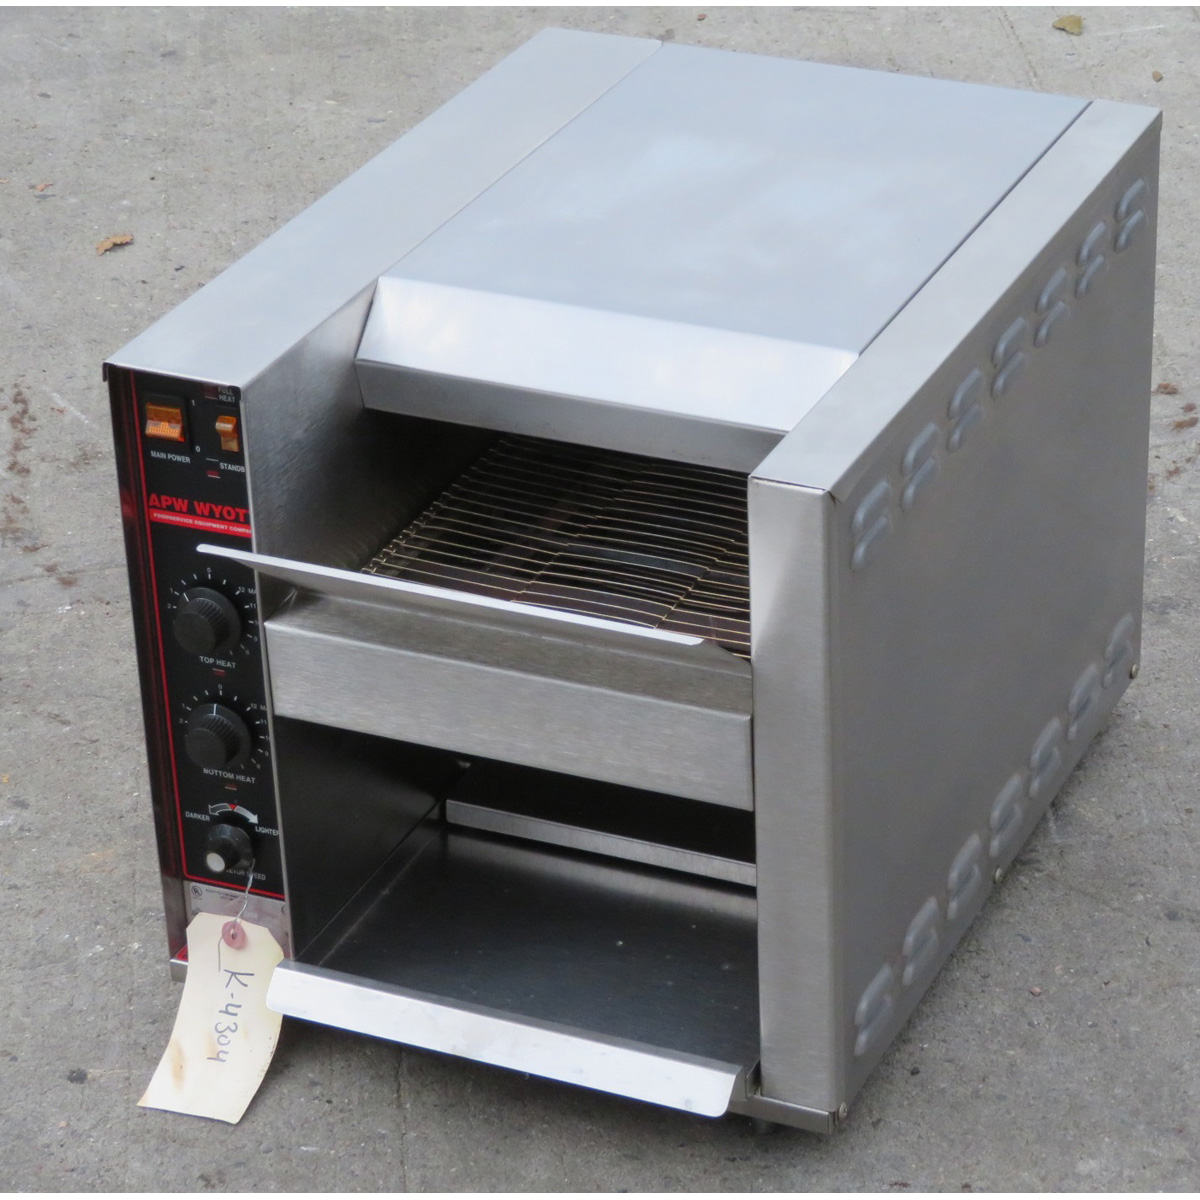 APW Wyott AT-10 Conveyor Toaster, Used Excellent Condition